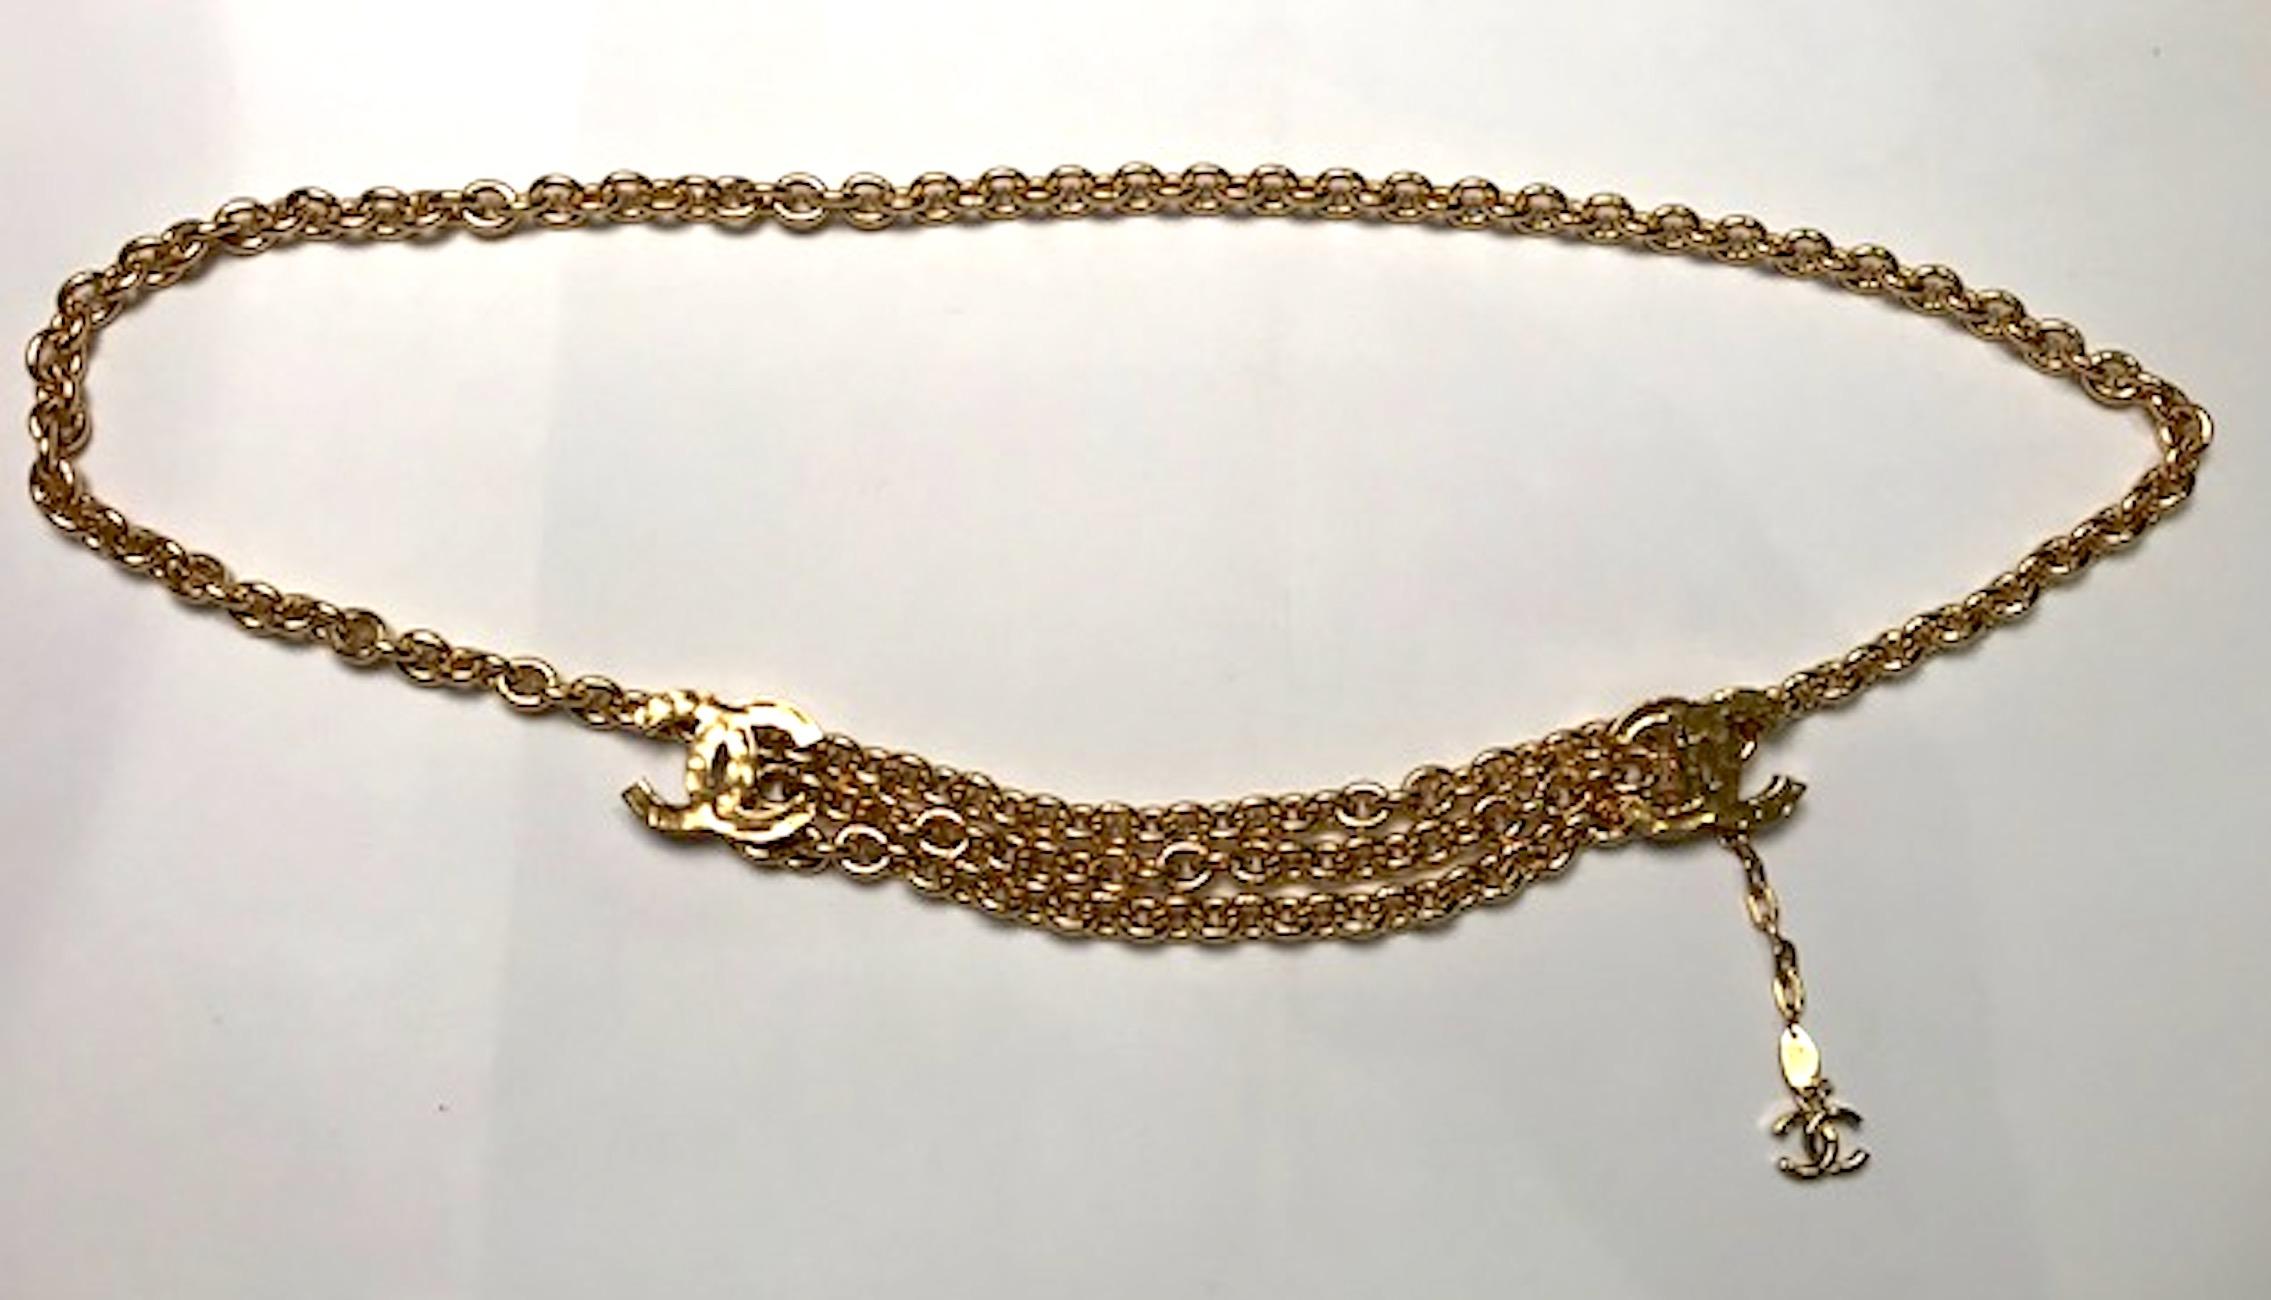 Classic Chanel gold chain belt from 1985. Center swags with two large Chanel CC logos. The total length of the belt is 33 inches. Three chains comprise the 7